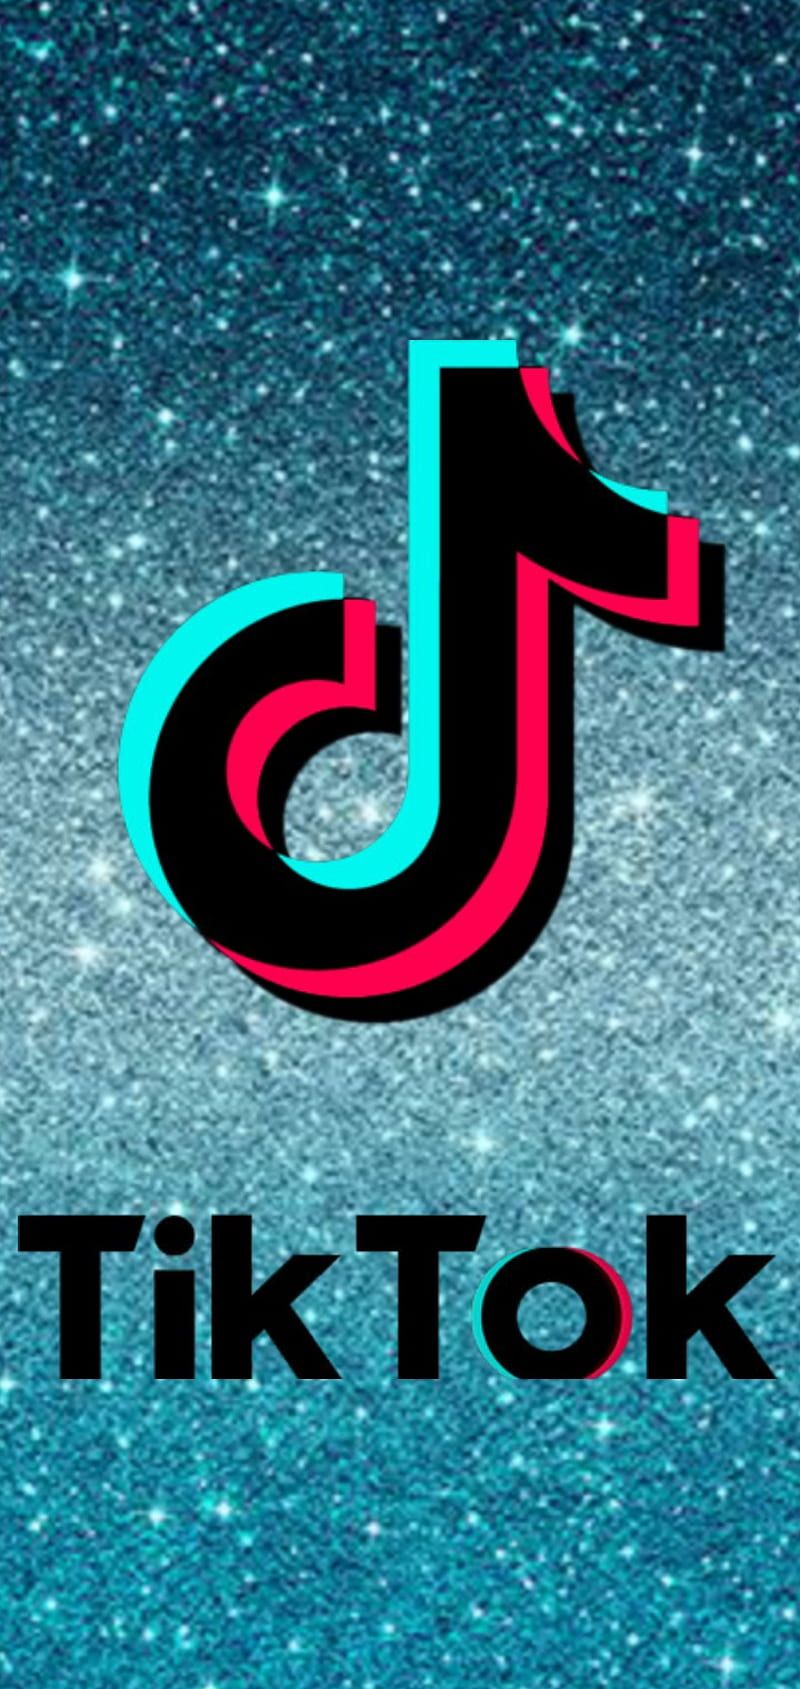 TikTok is a video-sharing social networking service that allows users to create and share short videos. - TikTok